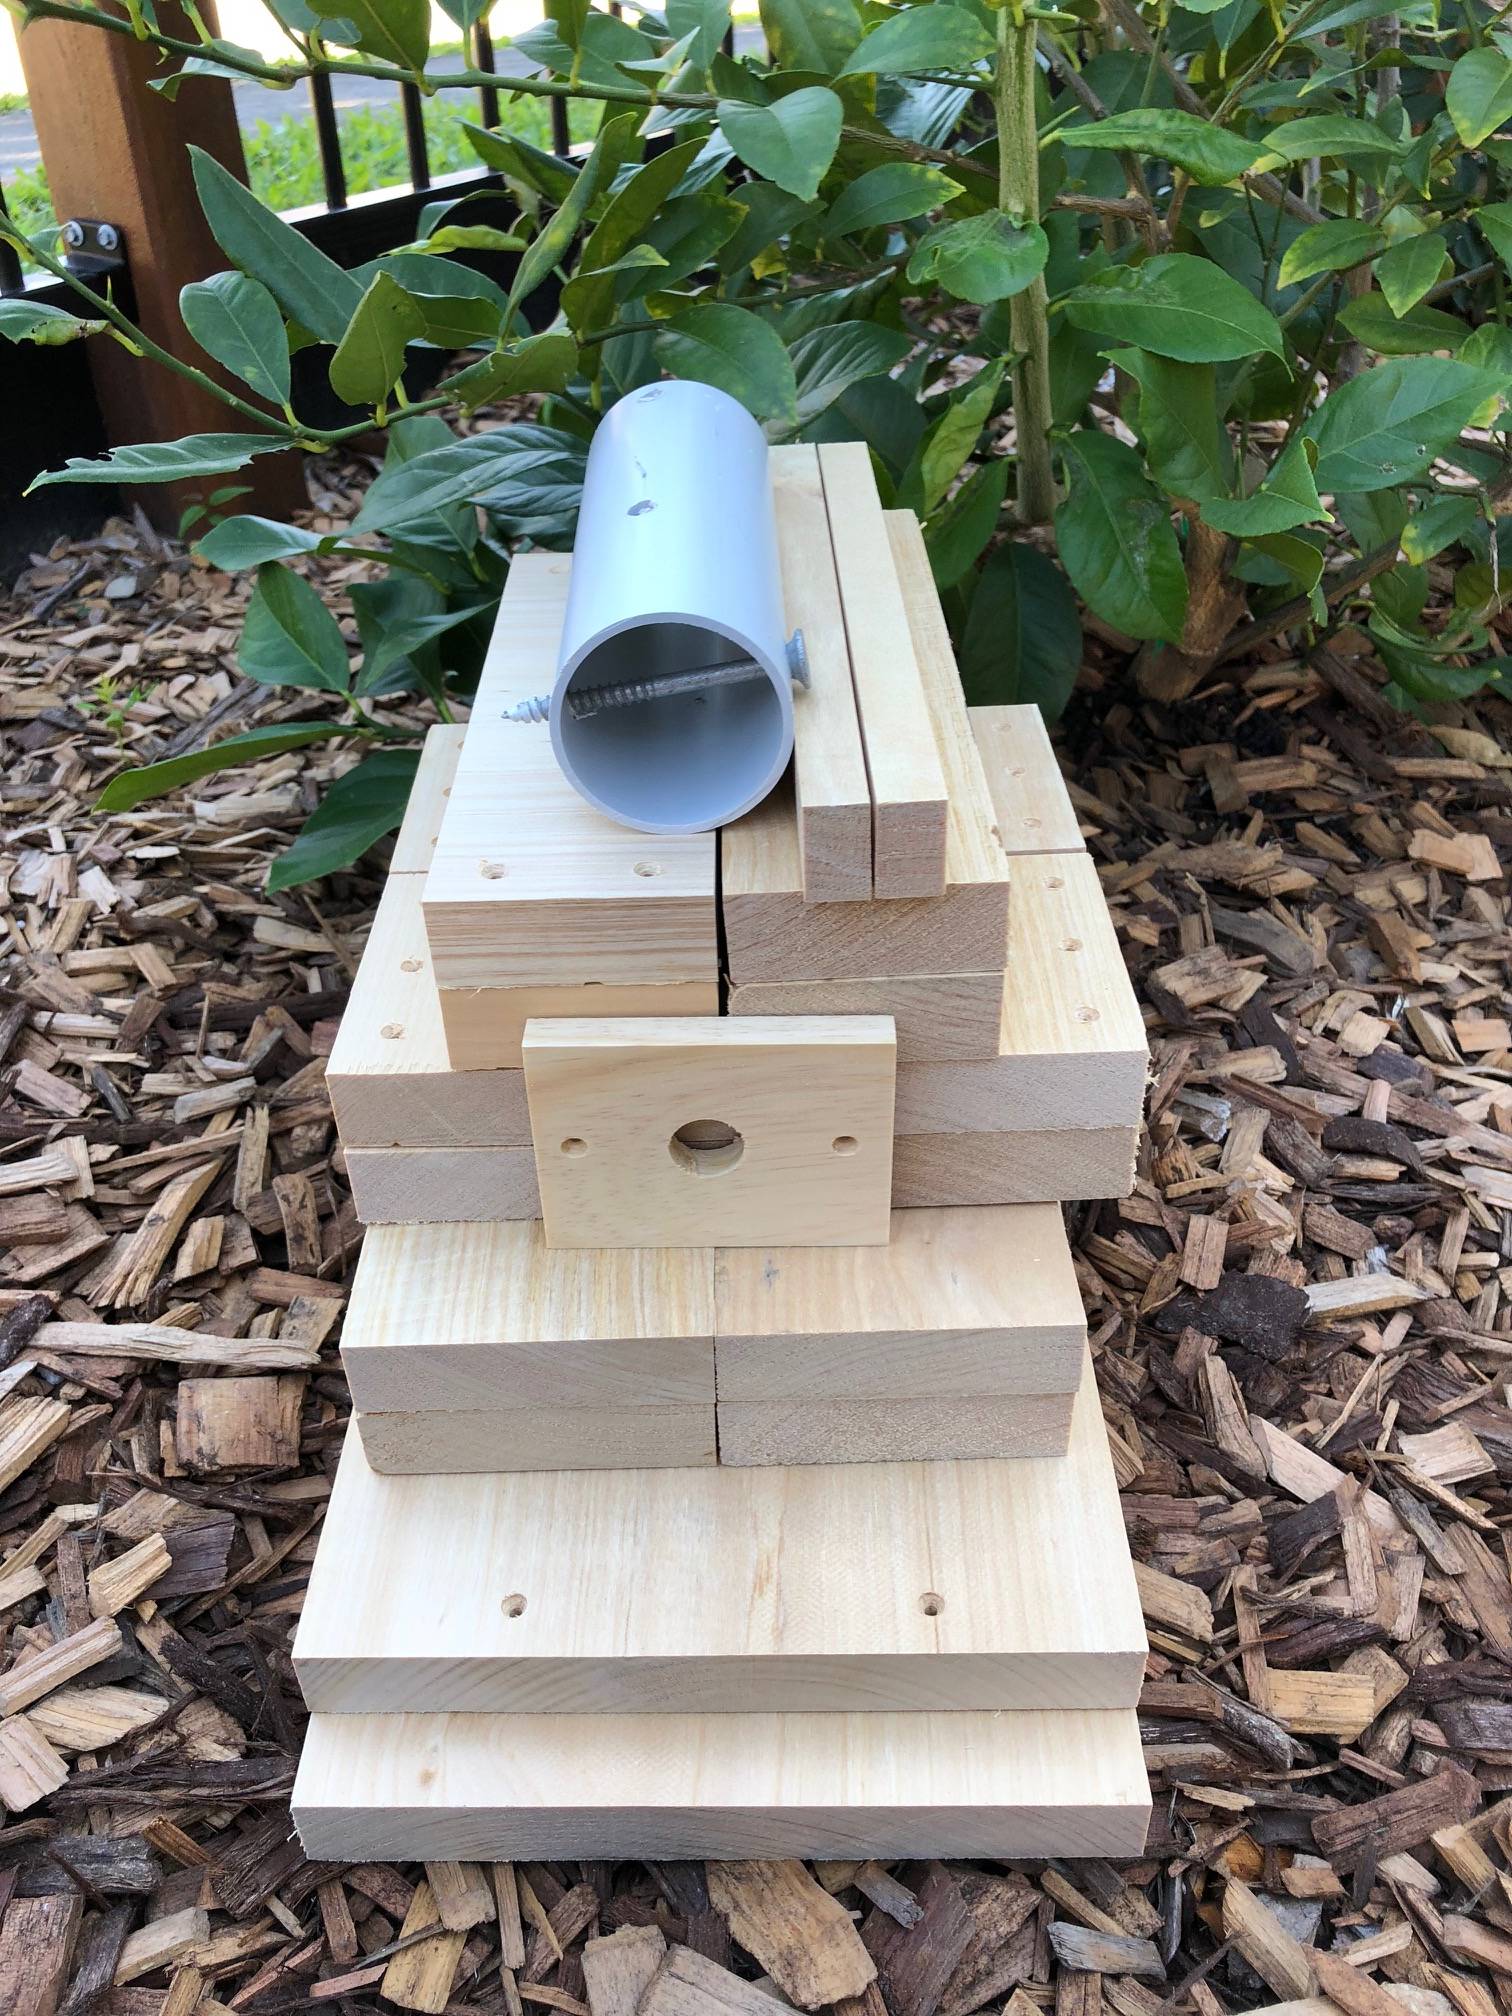 Stingless OATH Bee Hive | Do It Yourself Kit | Native Beehive Honey Pot Design - ABeeC Hives ...